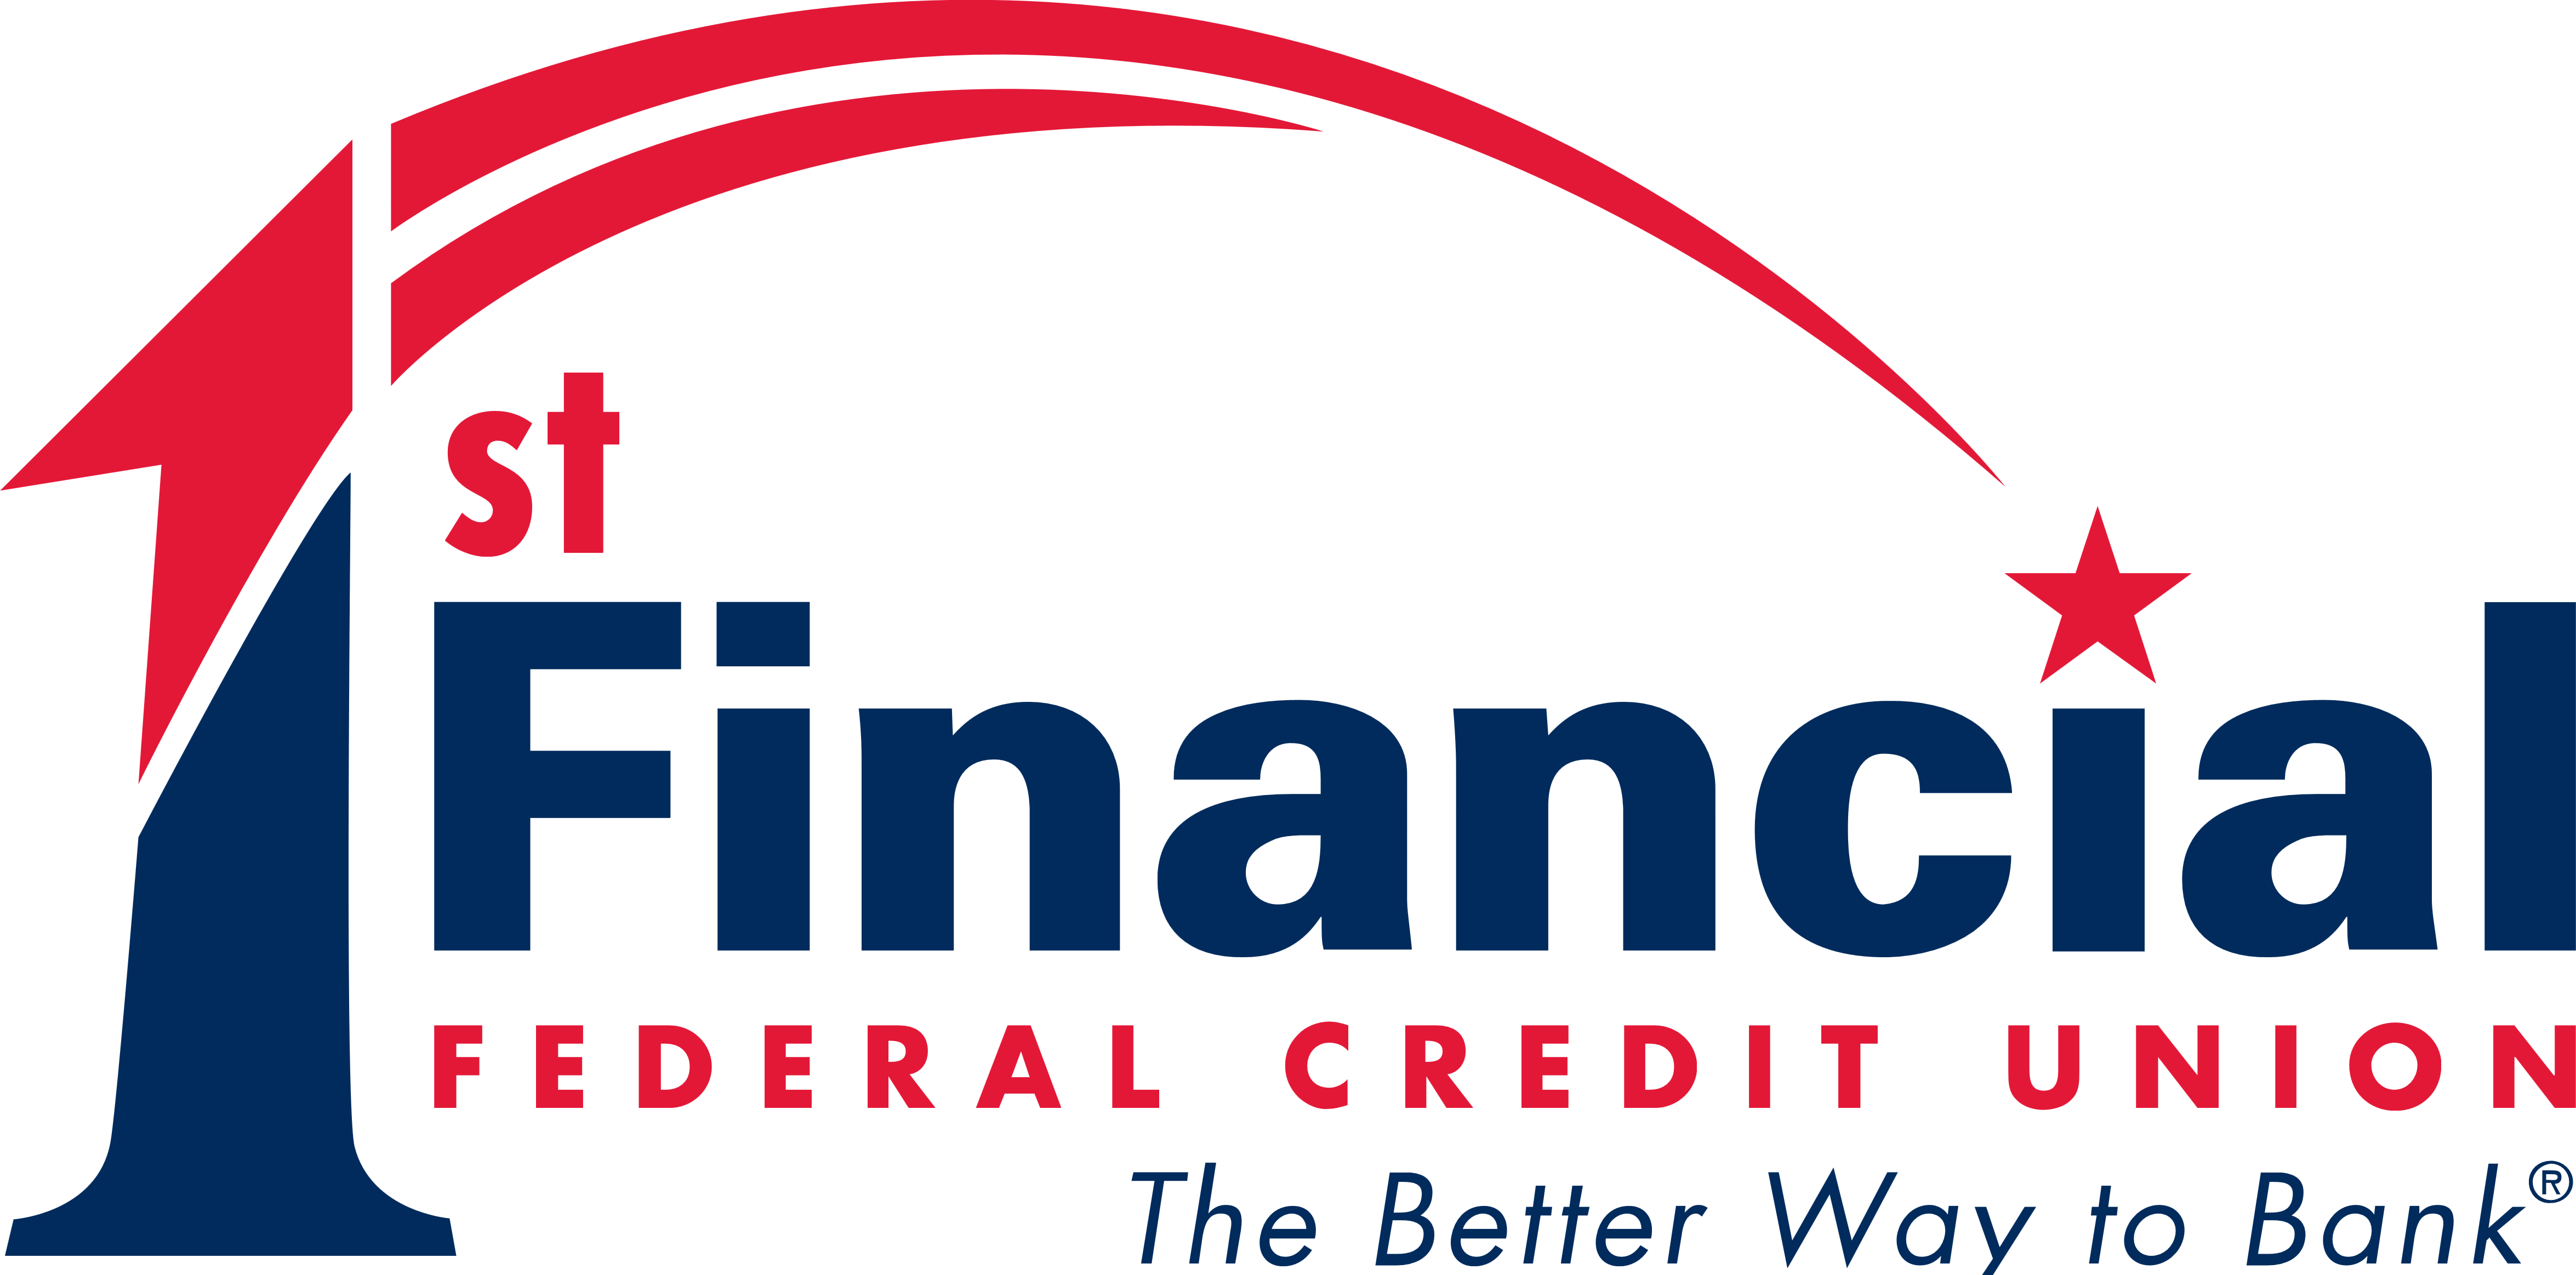 1st Logo - 1st Financial Federal Credit Union – Logos Download